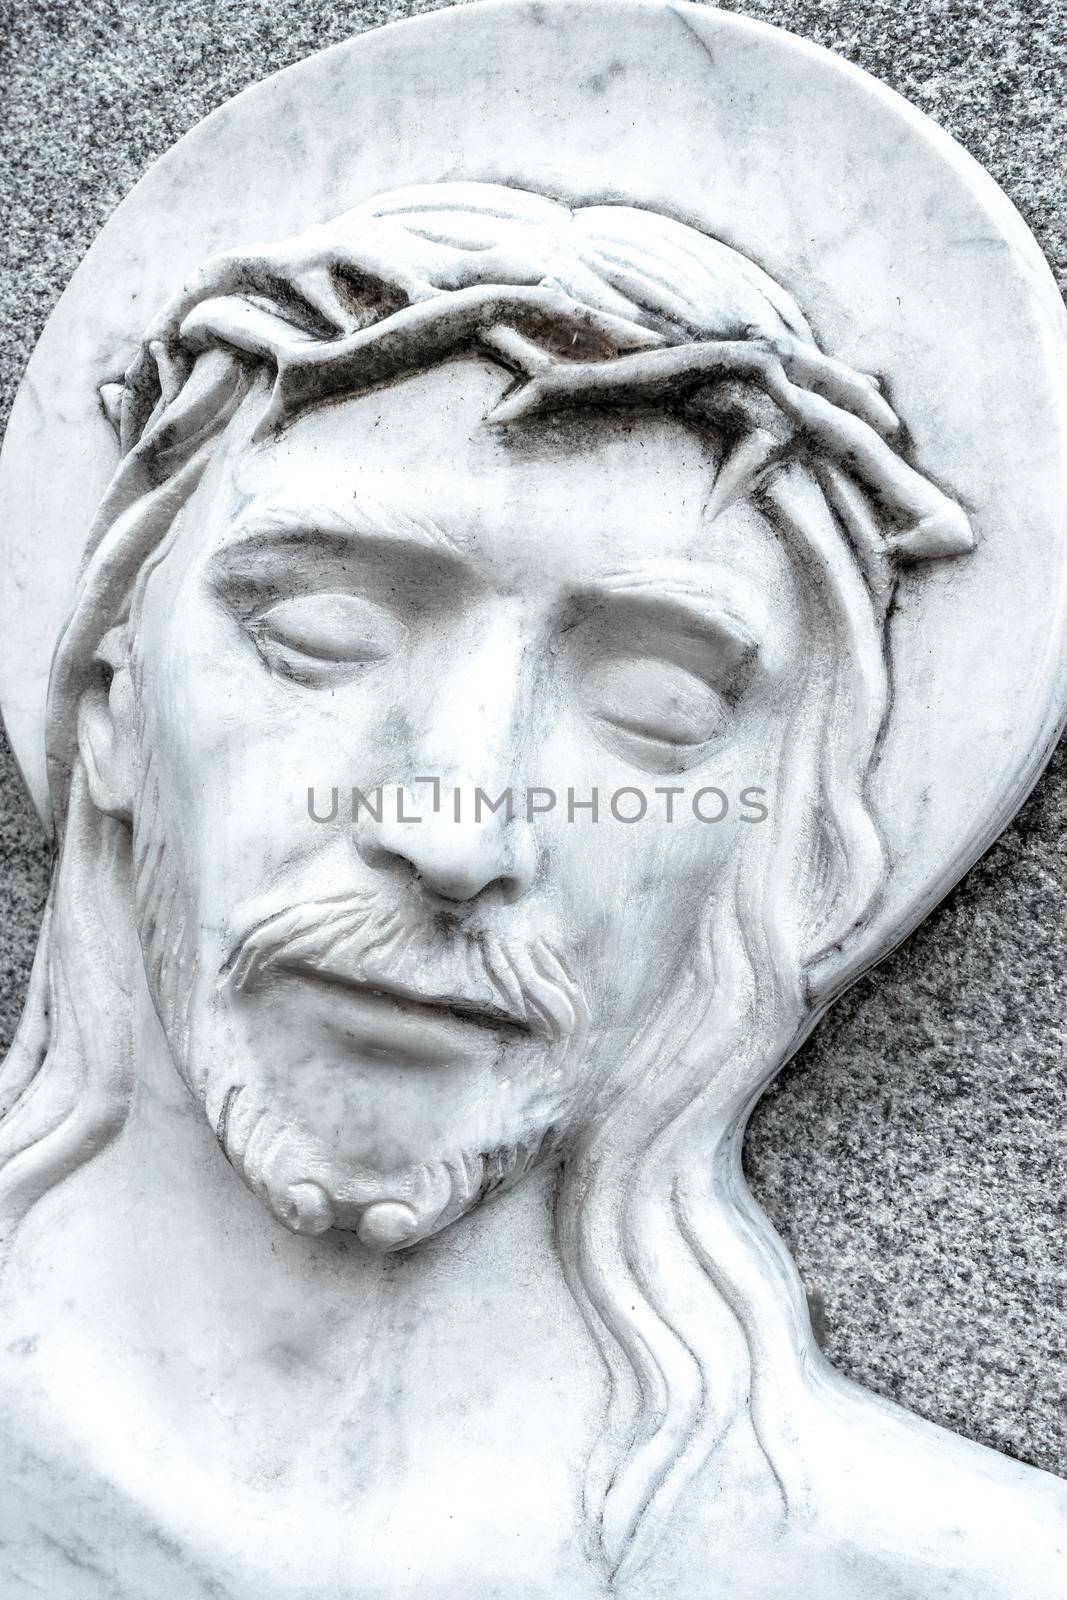 The face of Jesus Christ suffering on the cross. Bas relief.